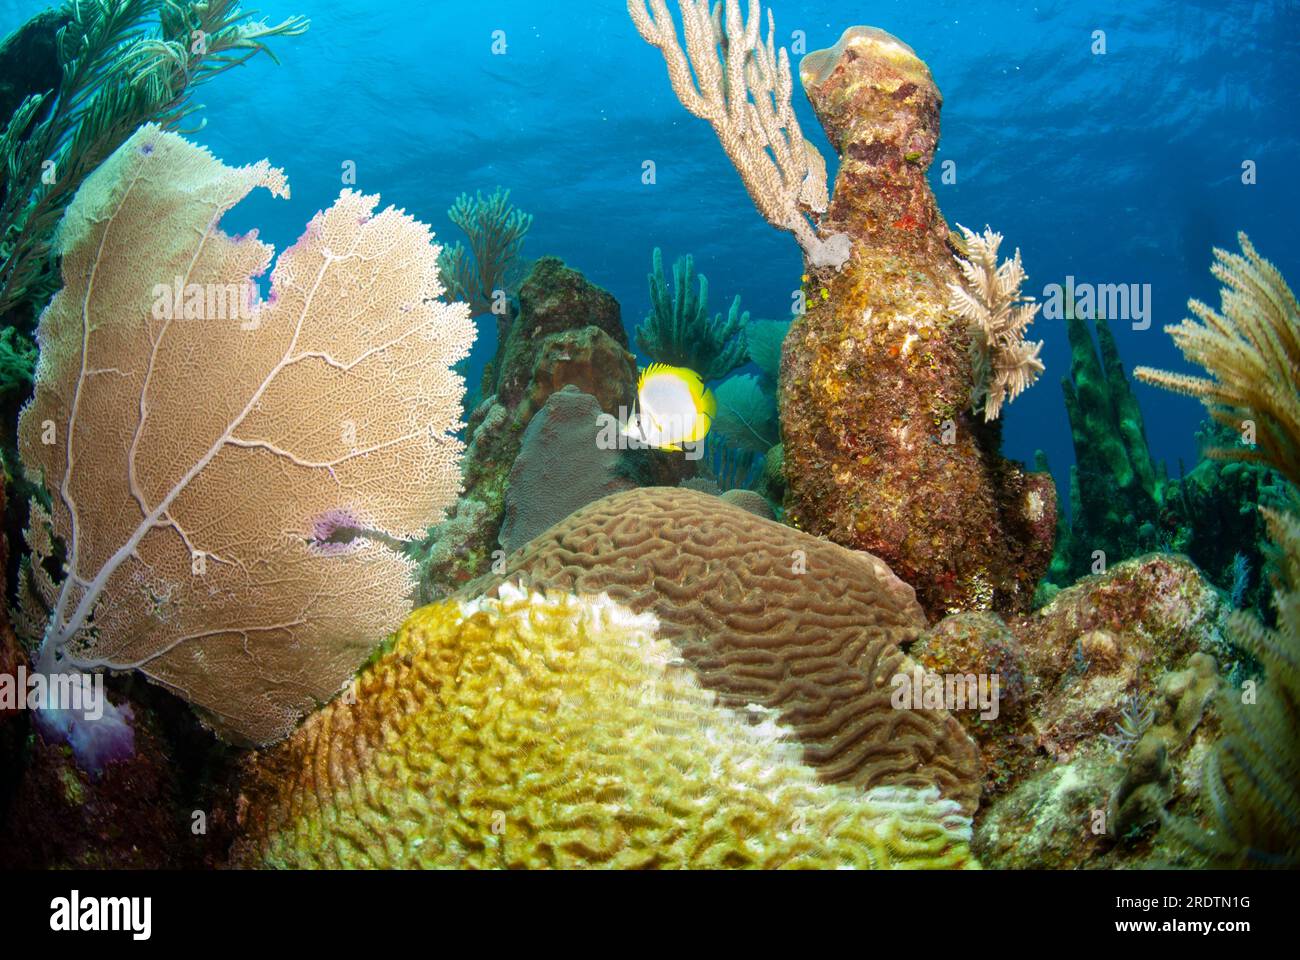 Spotfin butterflyfish and sick Brain coral affected by Stony Coral Tissue Loss Disease (SCTLD) Stock Photo